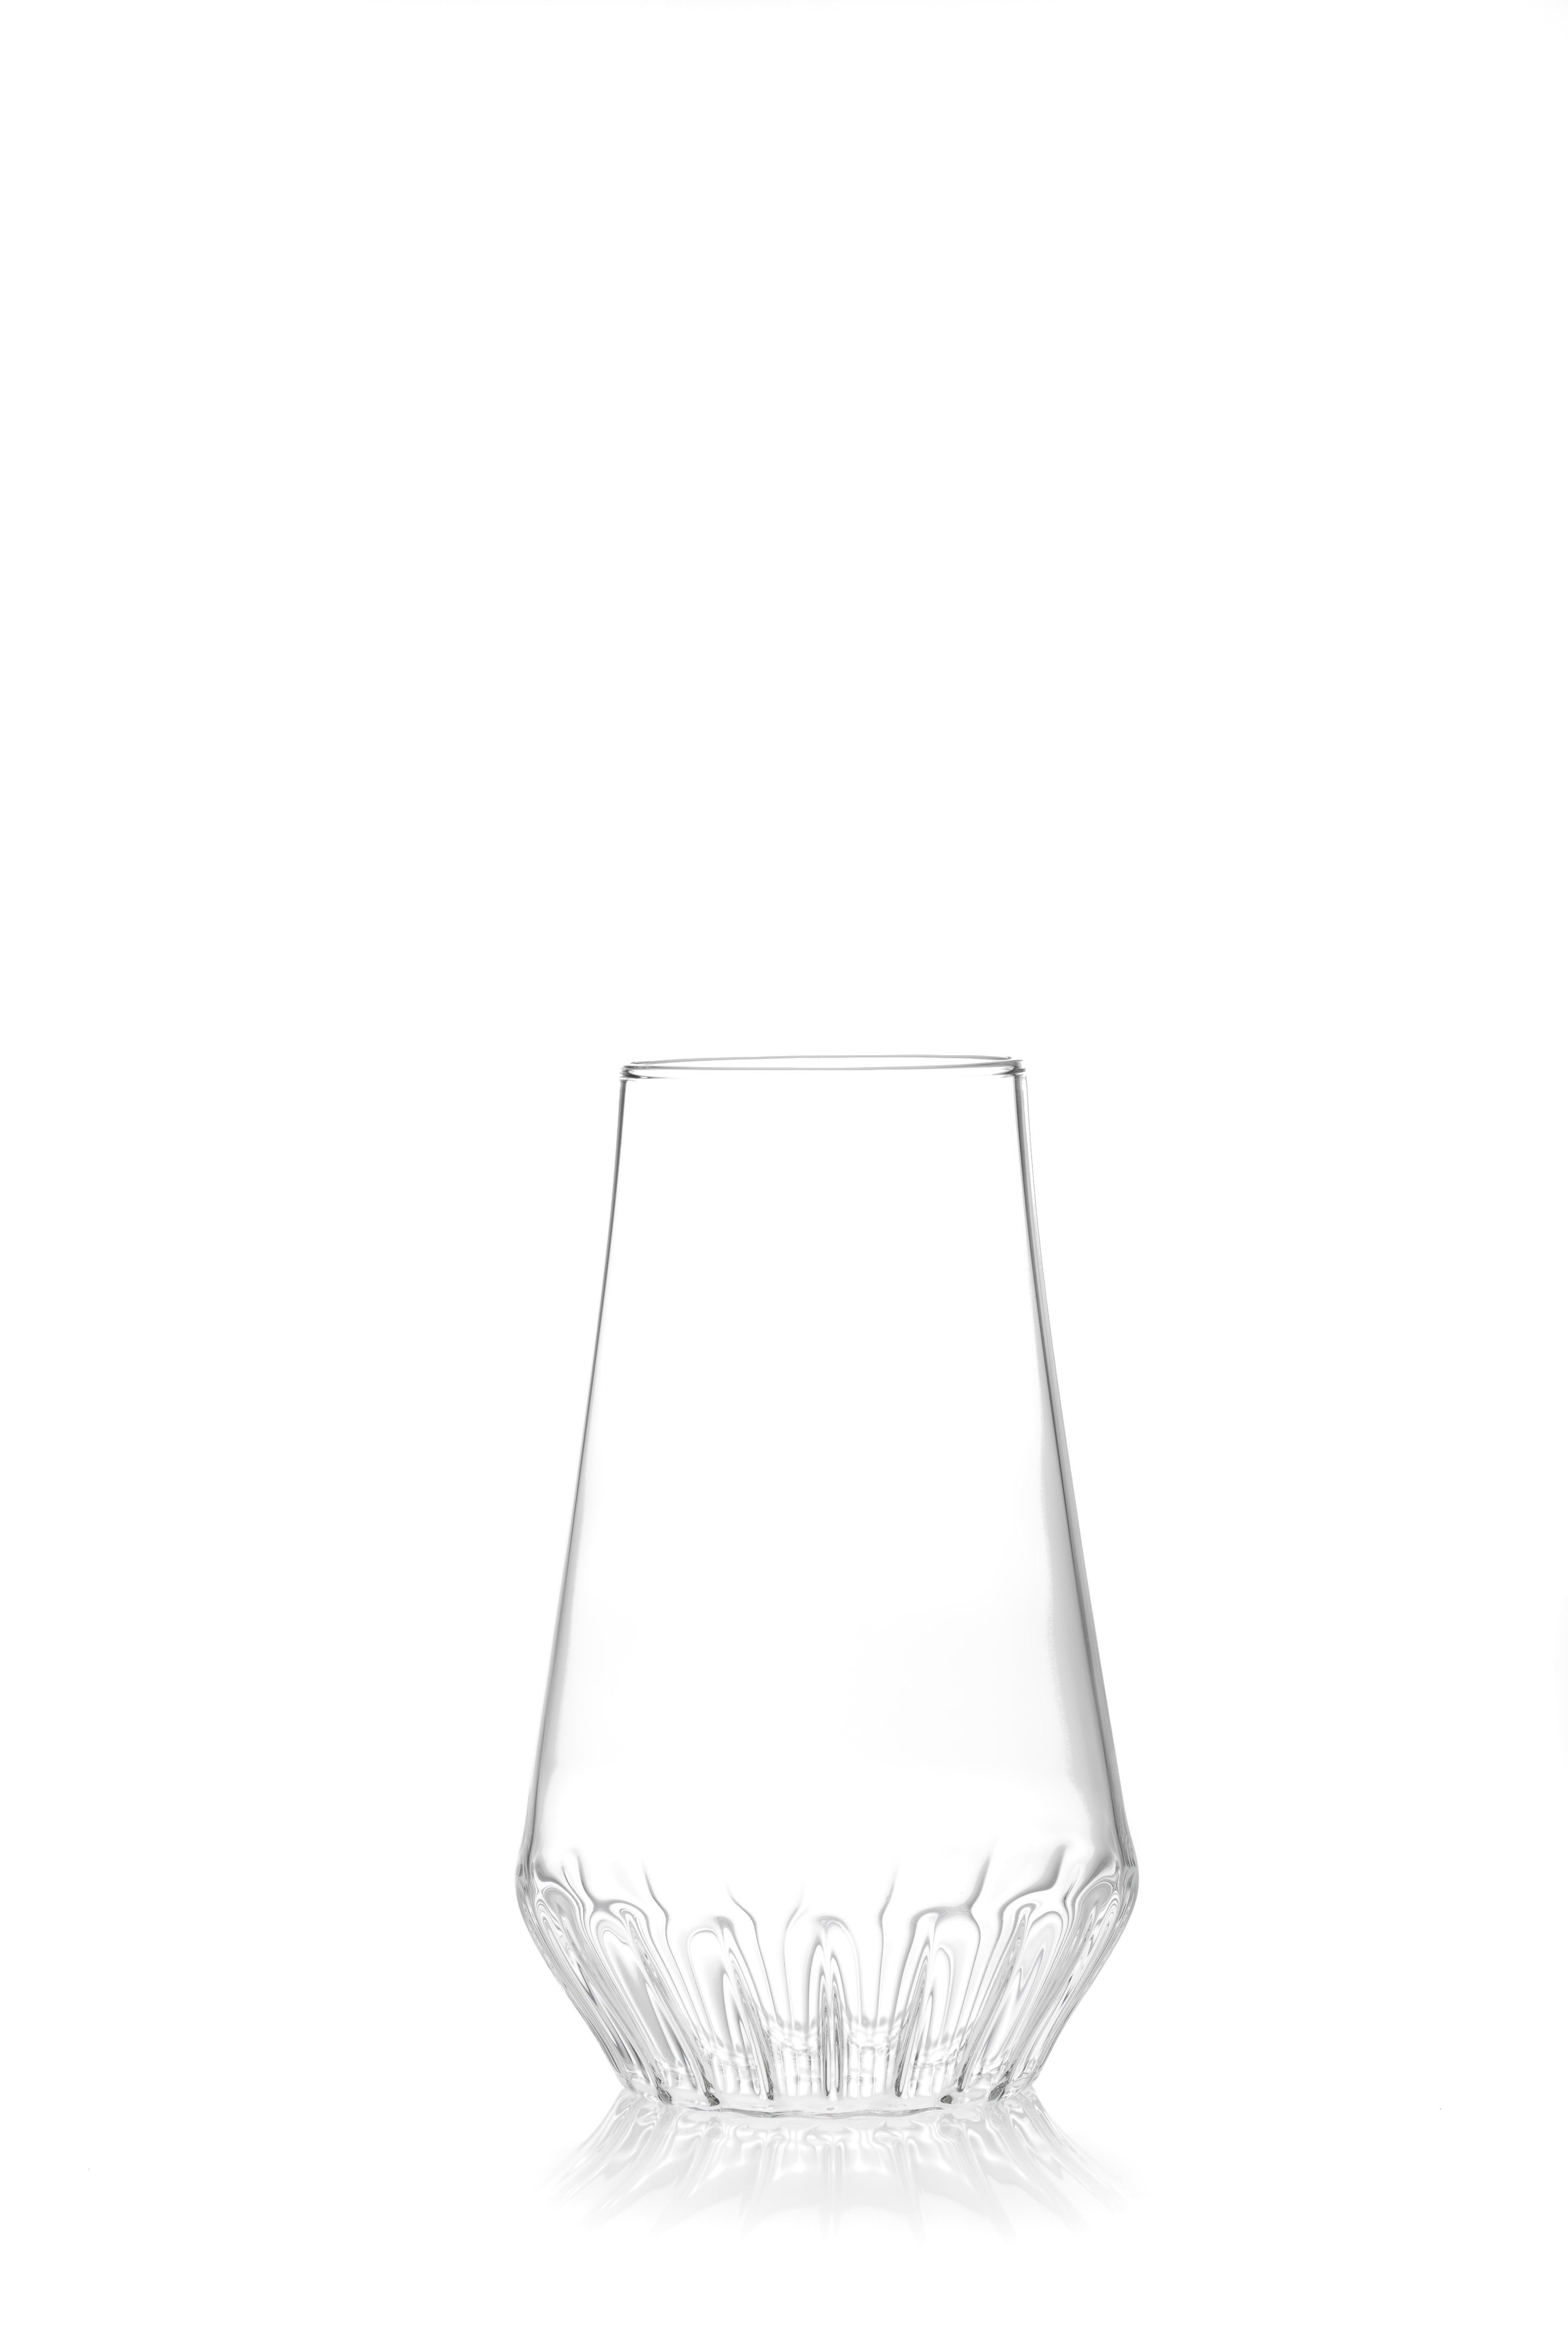 Modern fferrone Contemporary Handcrafted Czech Large & Medium Clear Glass Vases  For Sale